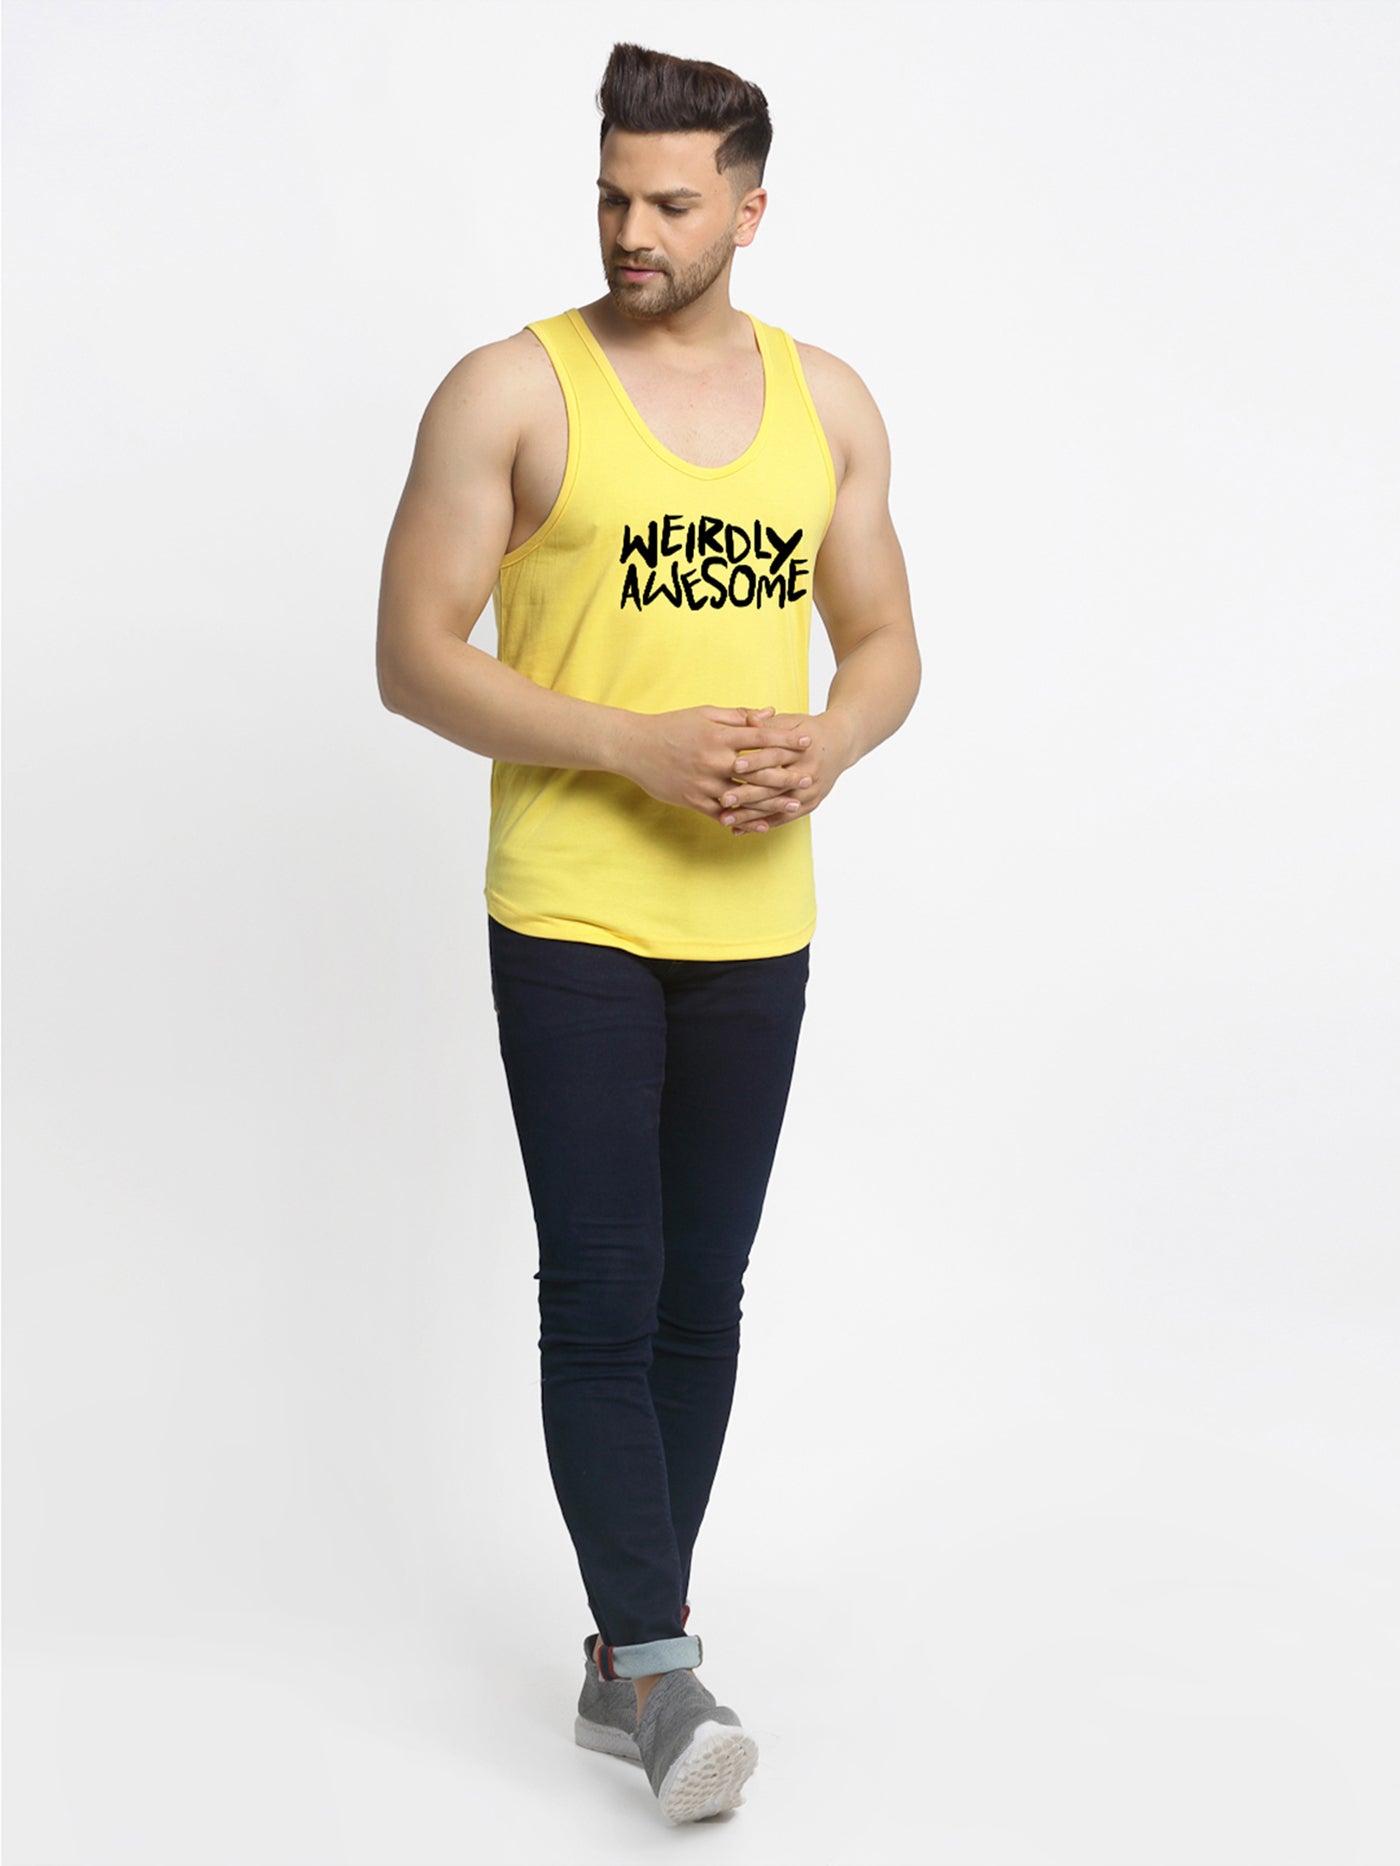 Men Awesome Printed Innerwear Gym Vest - Friskers